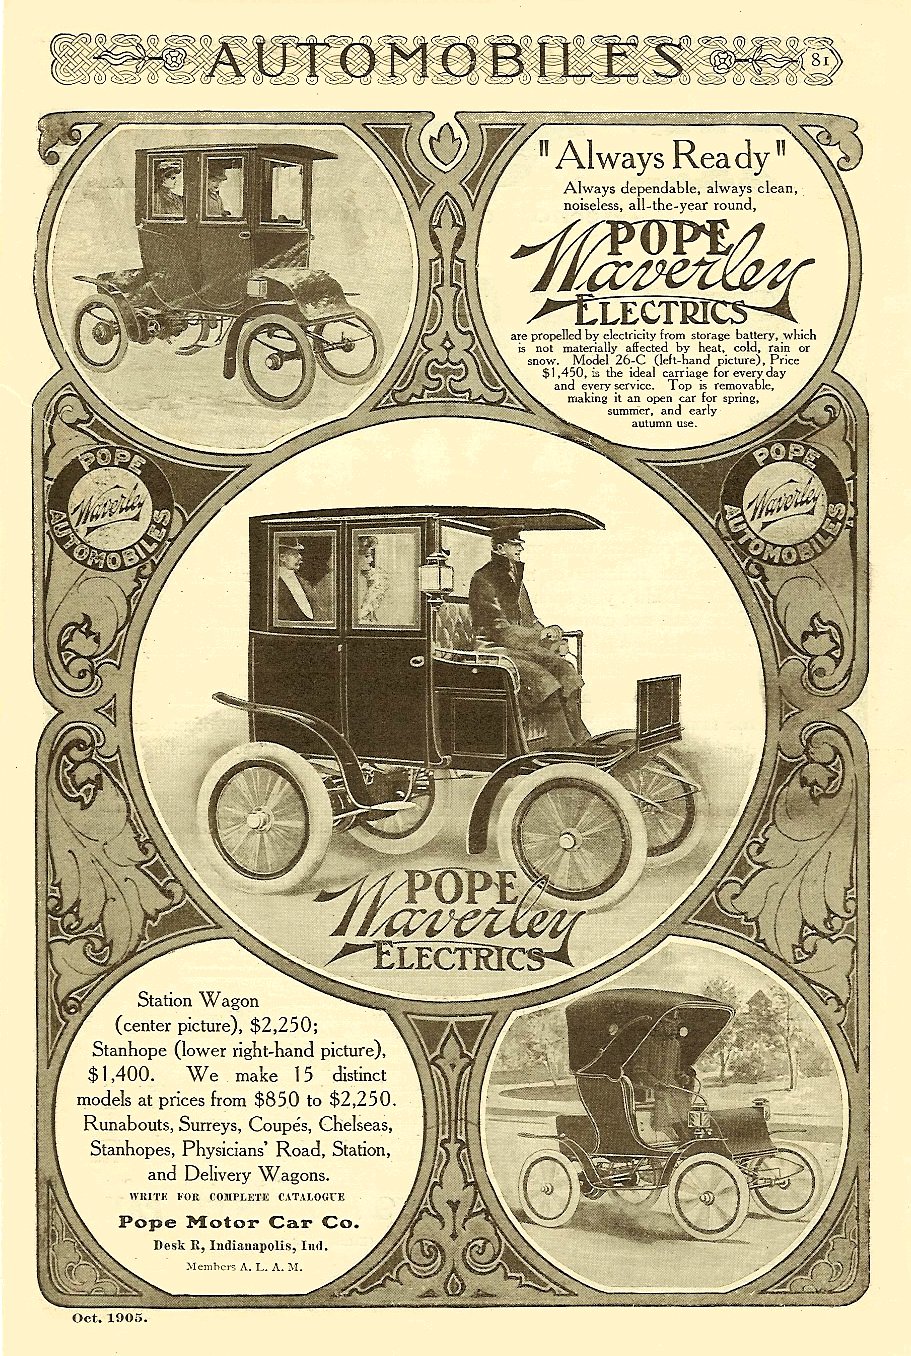 1905 Pope Waverly Electric Ad-01